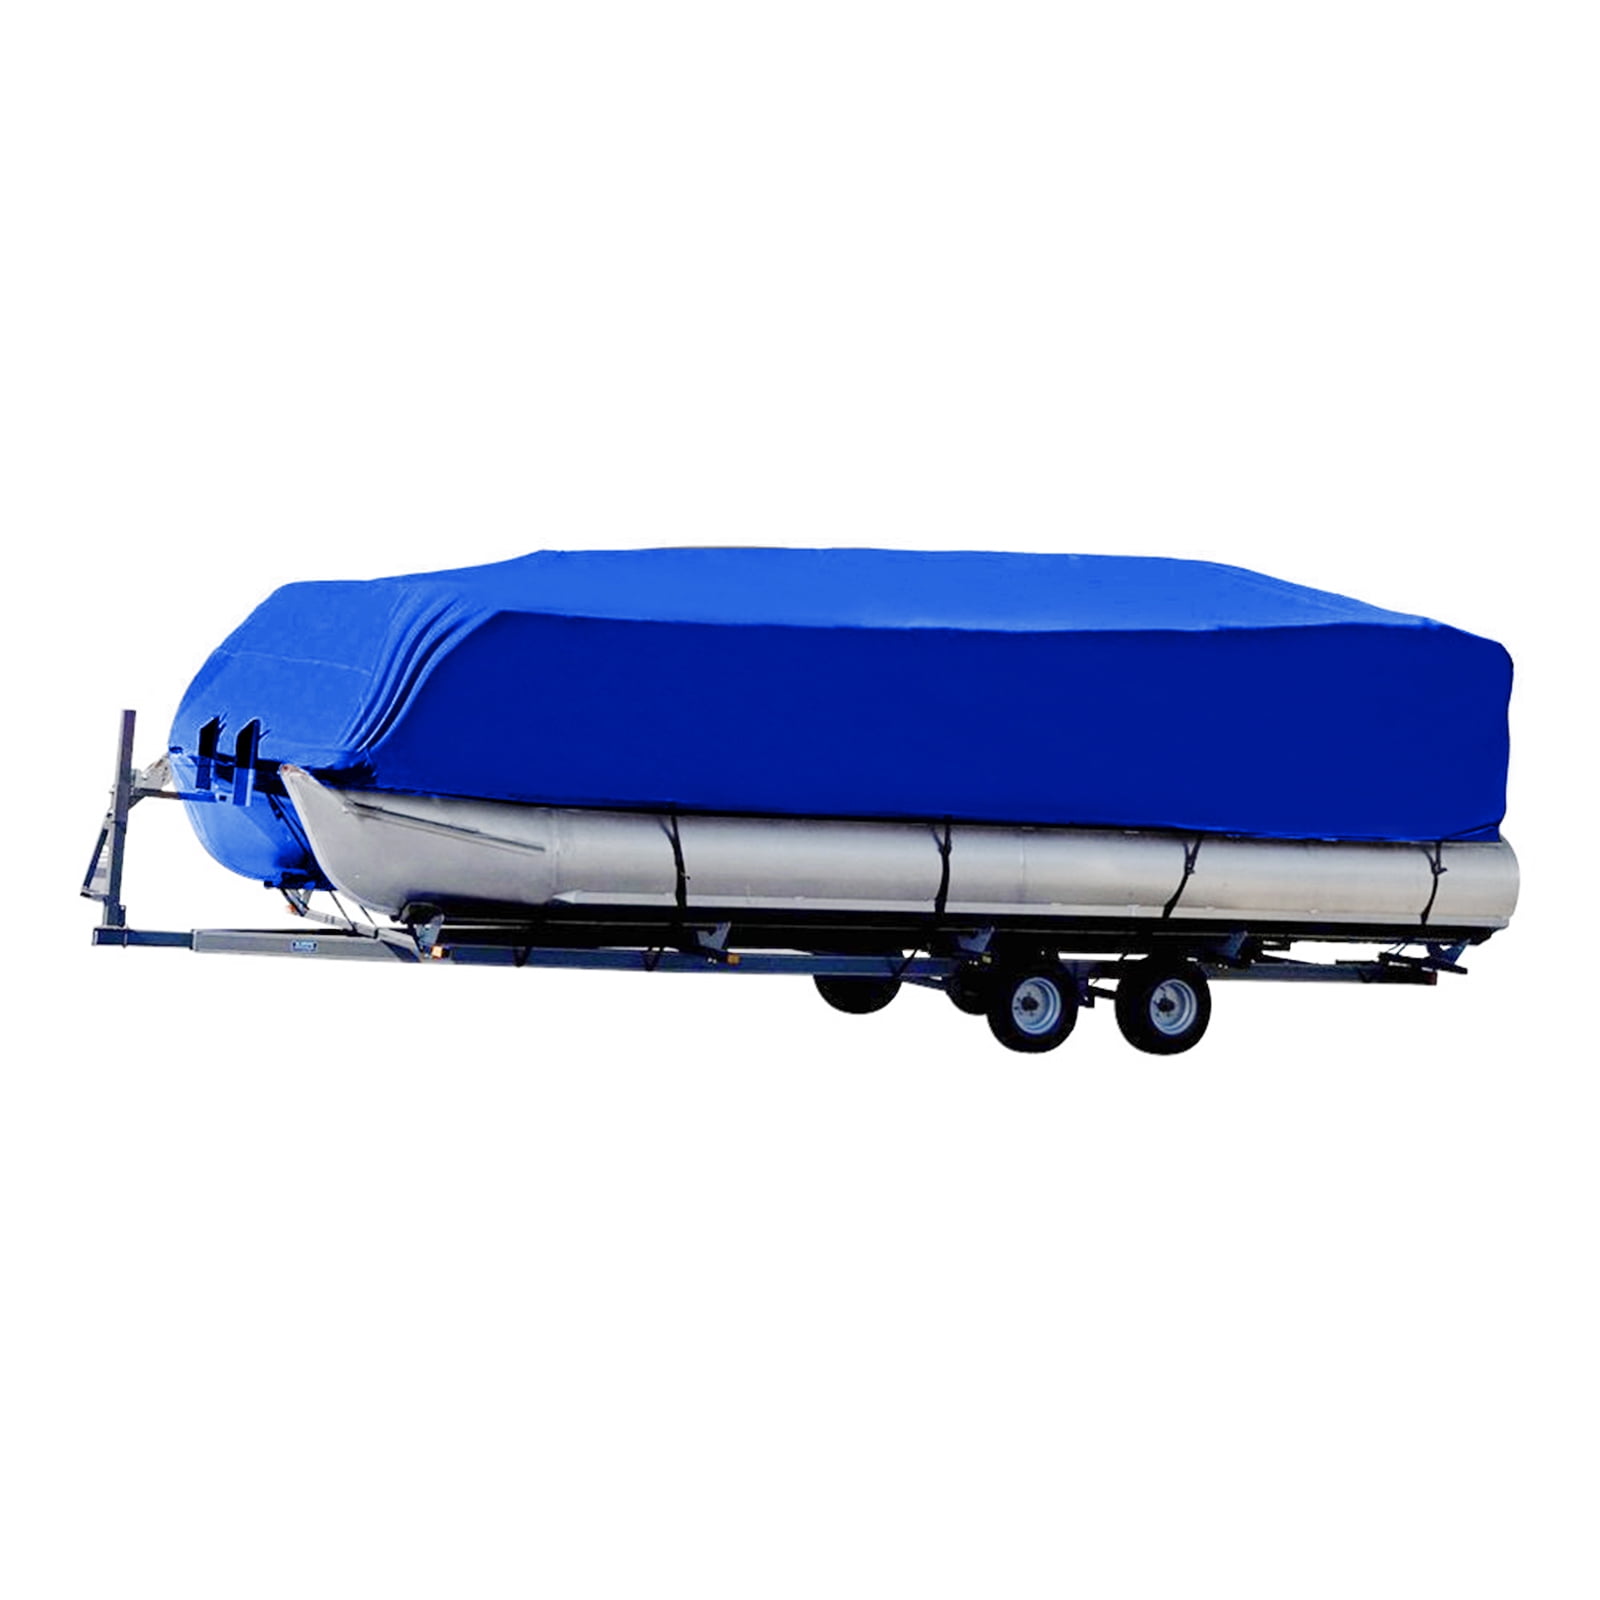 Boat Length 17-20ft, Beam Width up to 96 NEVERLAND Trailerable Pontoon Boat Cover Waterproof Heavy Duty Marine Grade Polyester Canvas Fits Pontoon/Deck Boats 